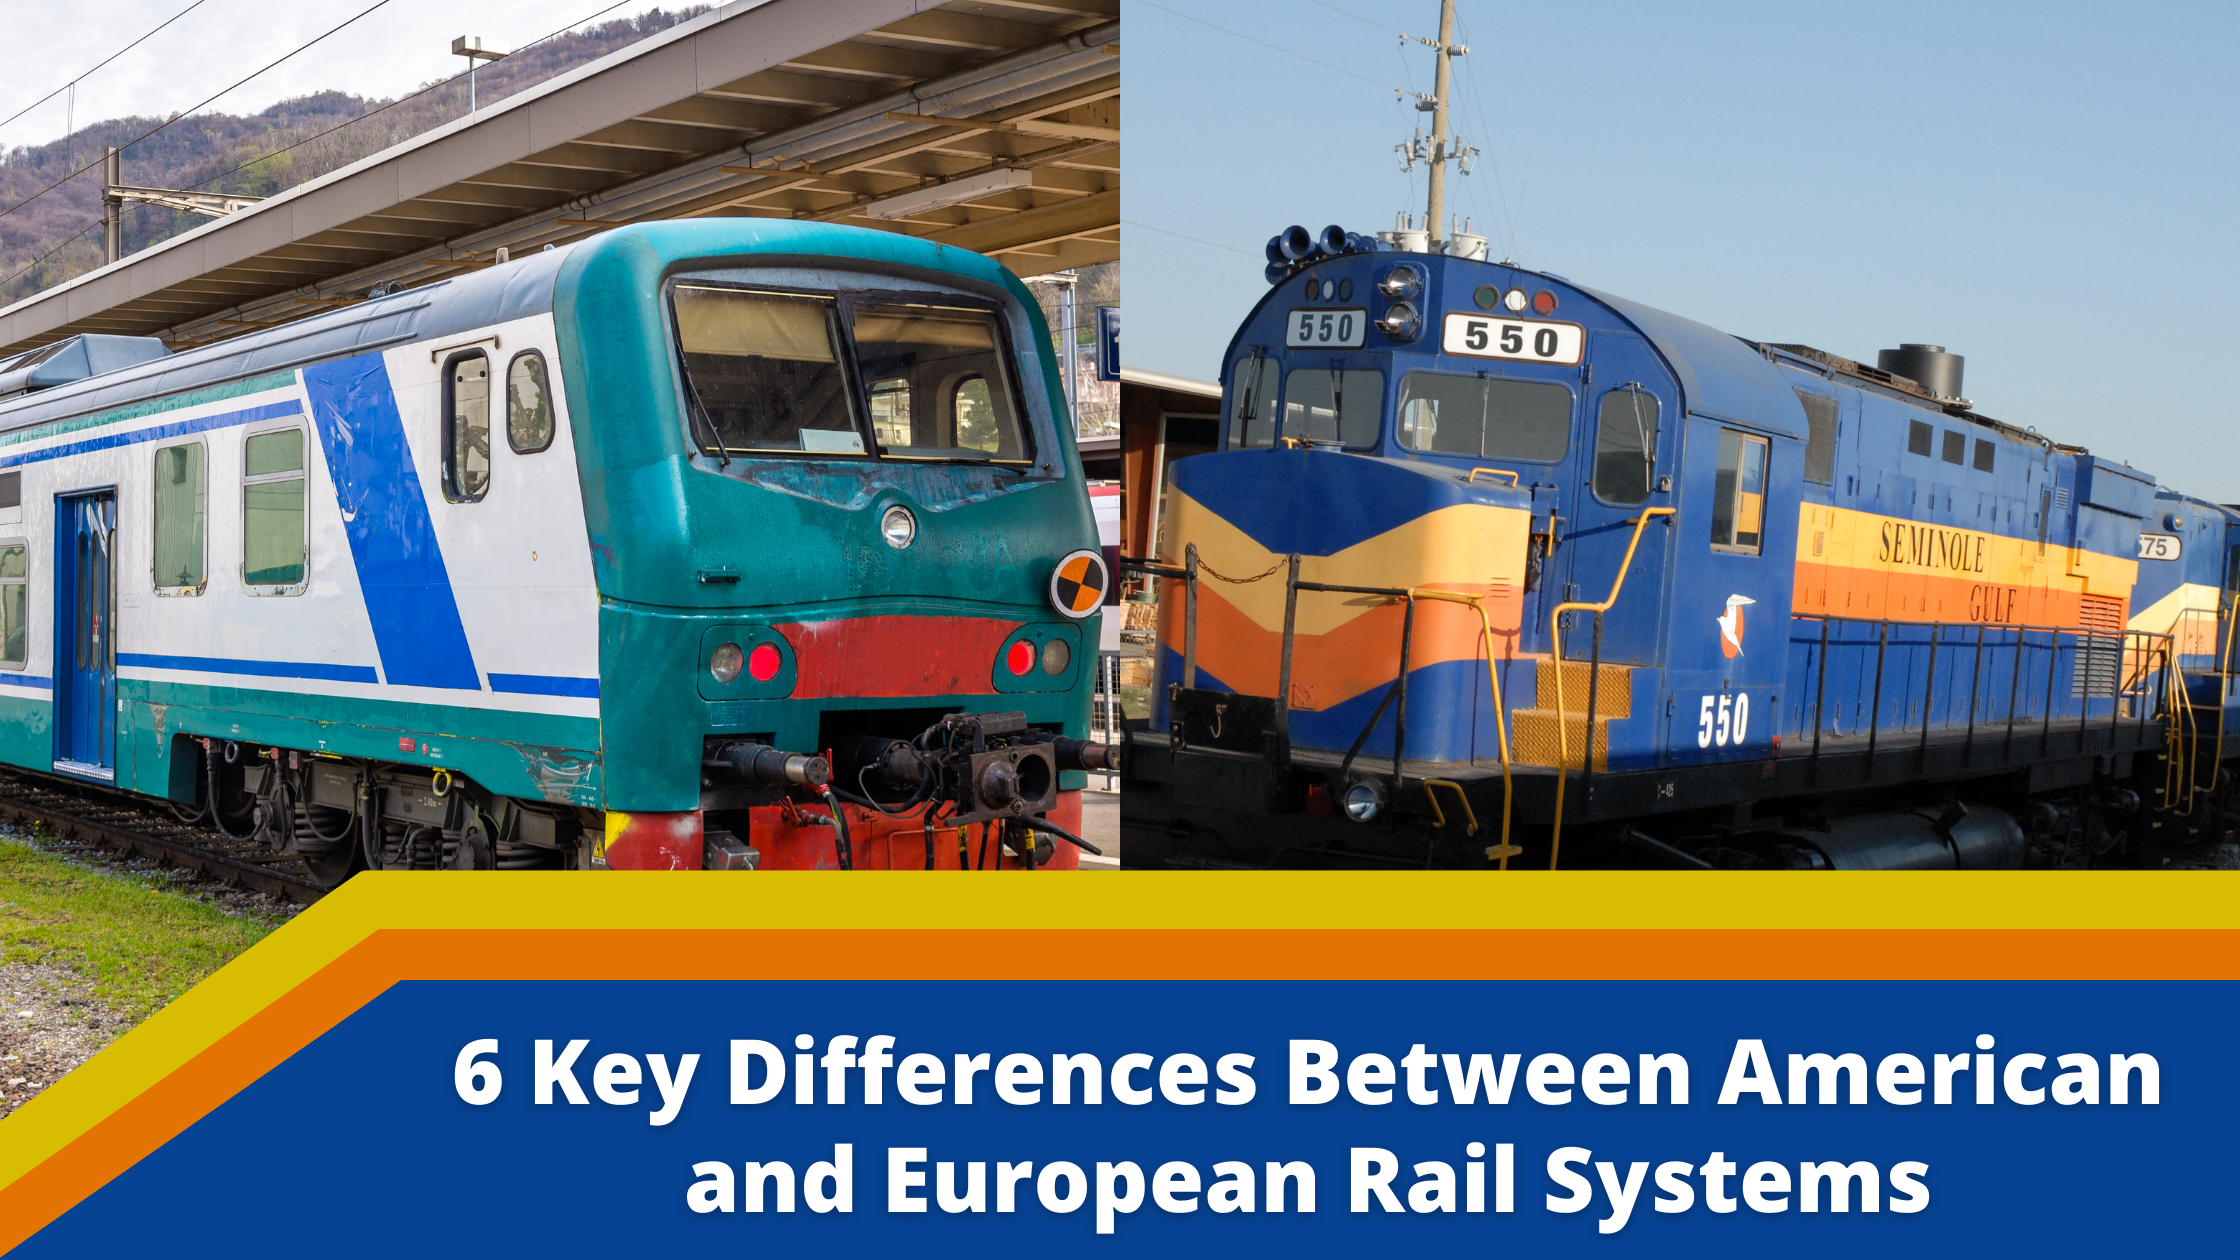 All About The Difference Between Passenger and Freight Trains